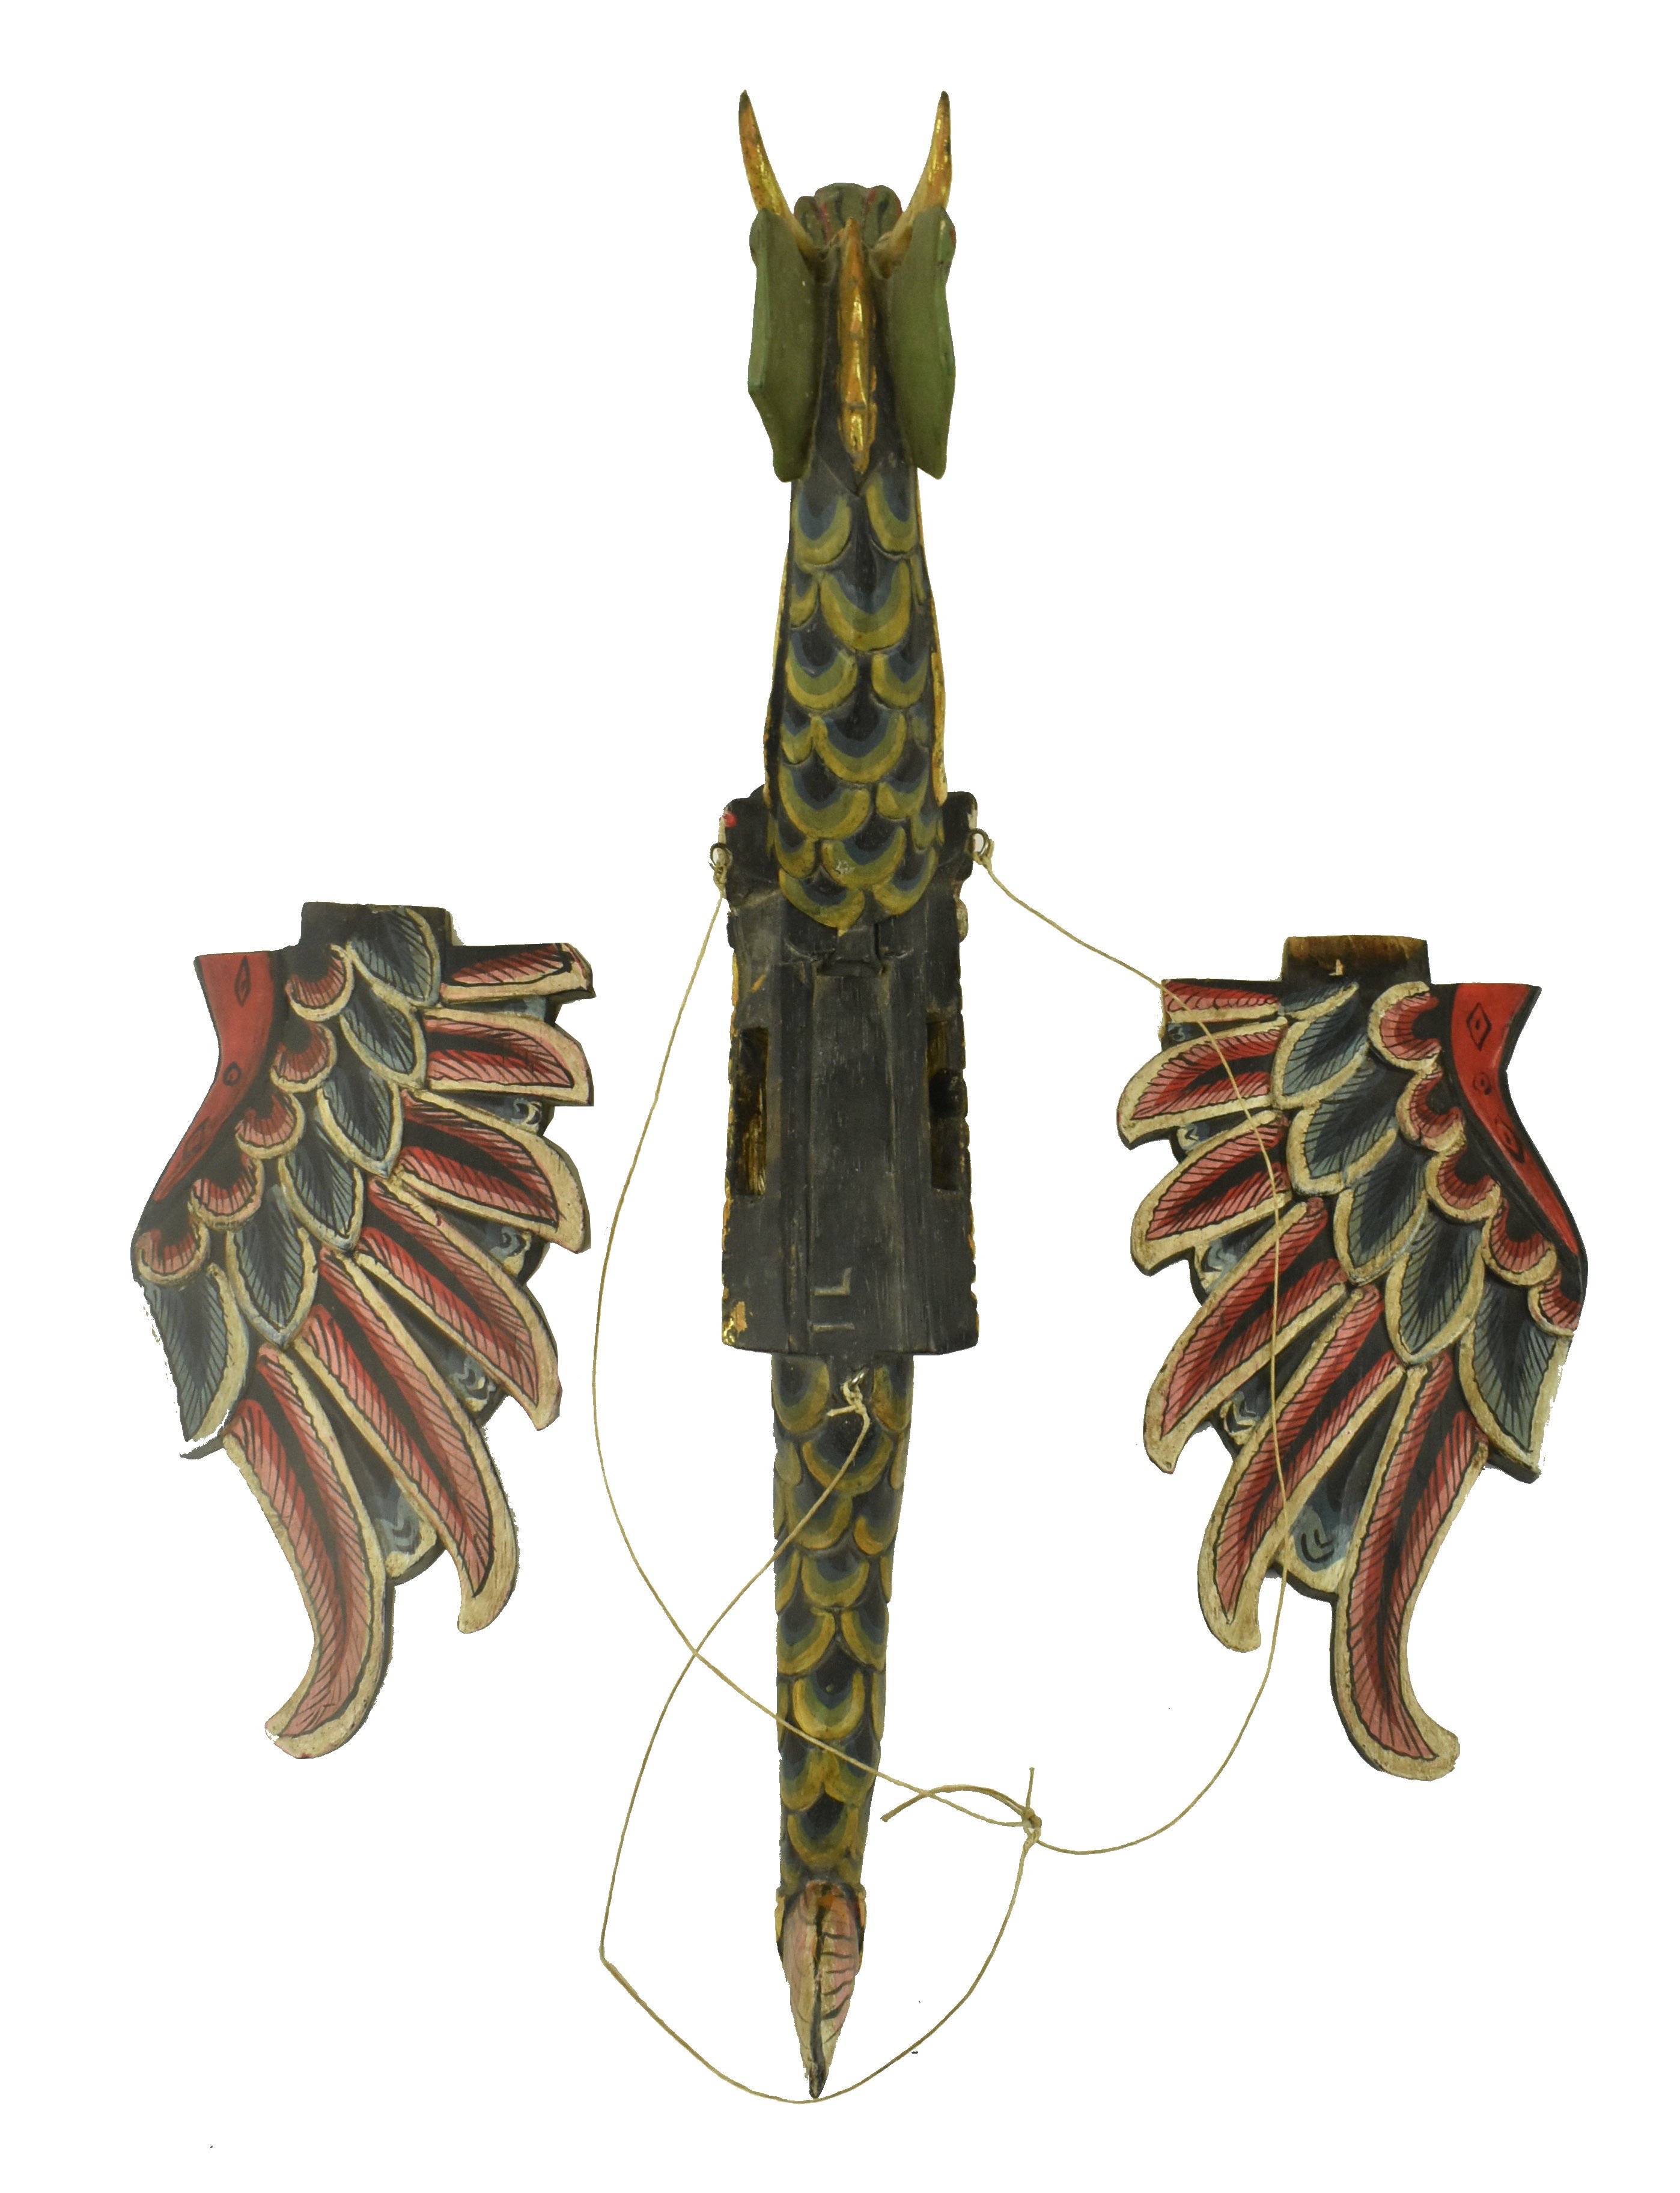 TWO INDIAN STYLE HANGING MID CENTURY ANIMAL MOBILES - Image 4 of 6